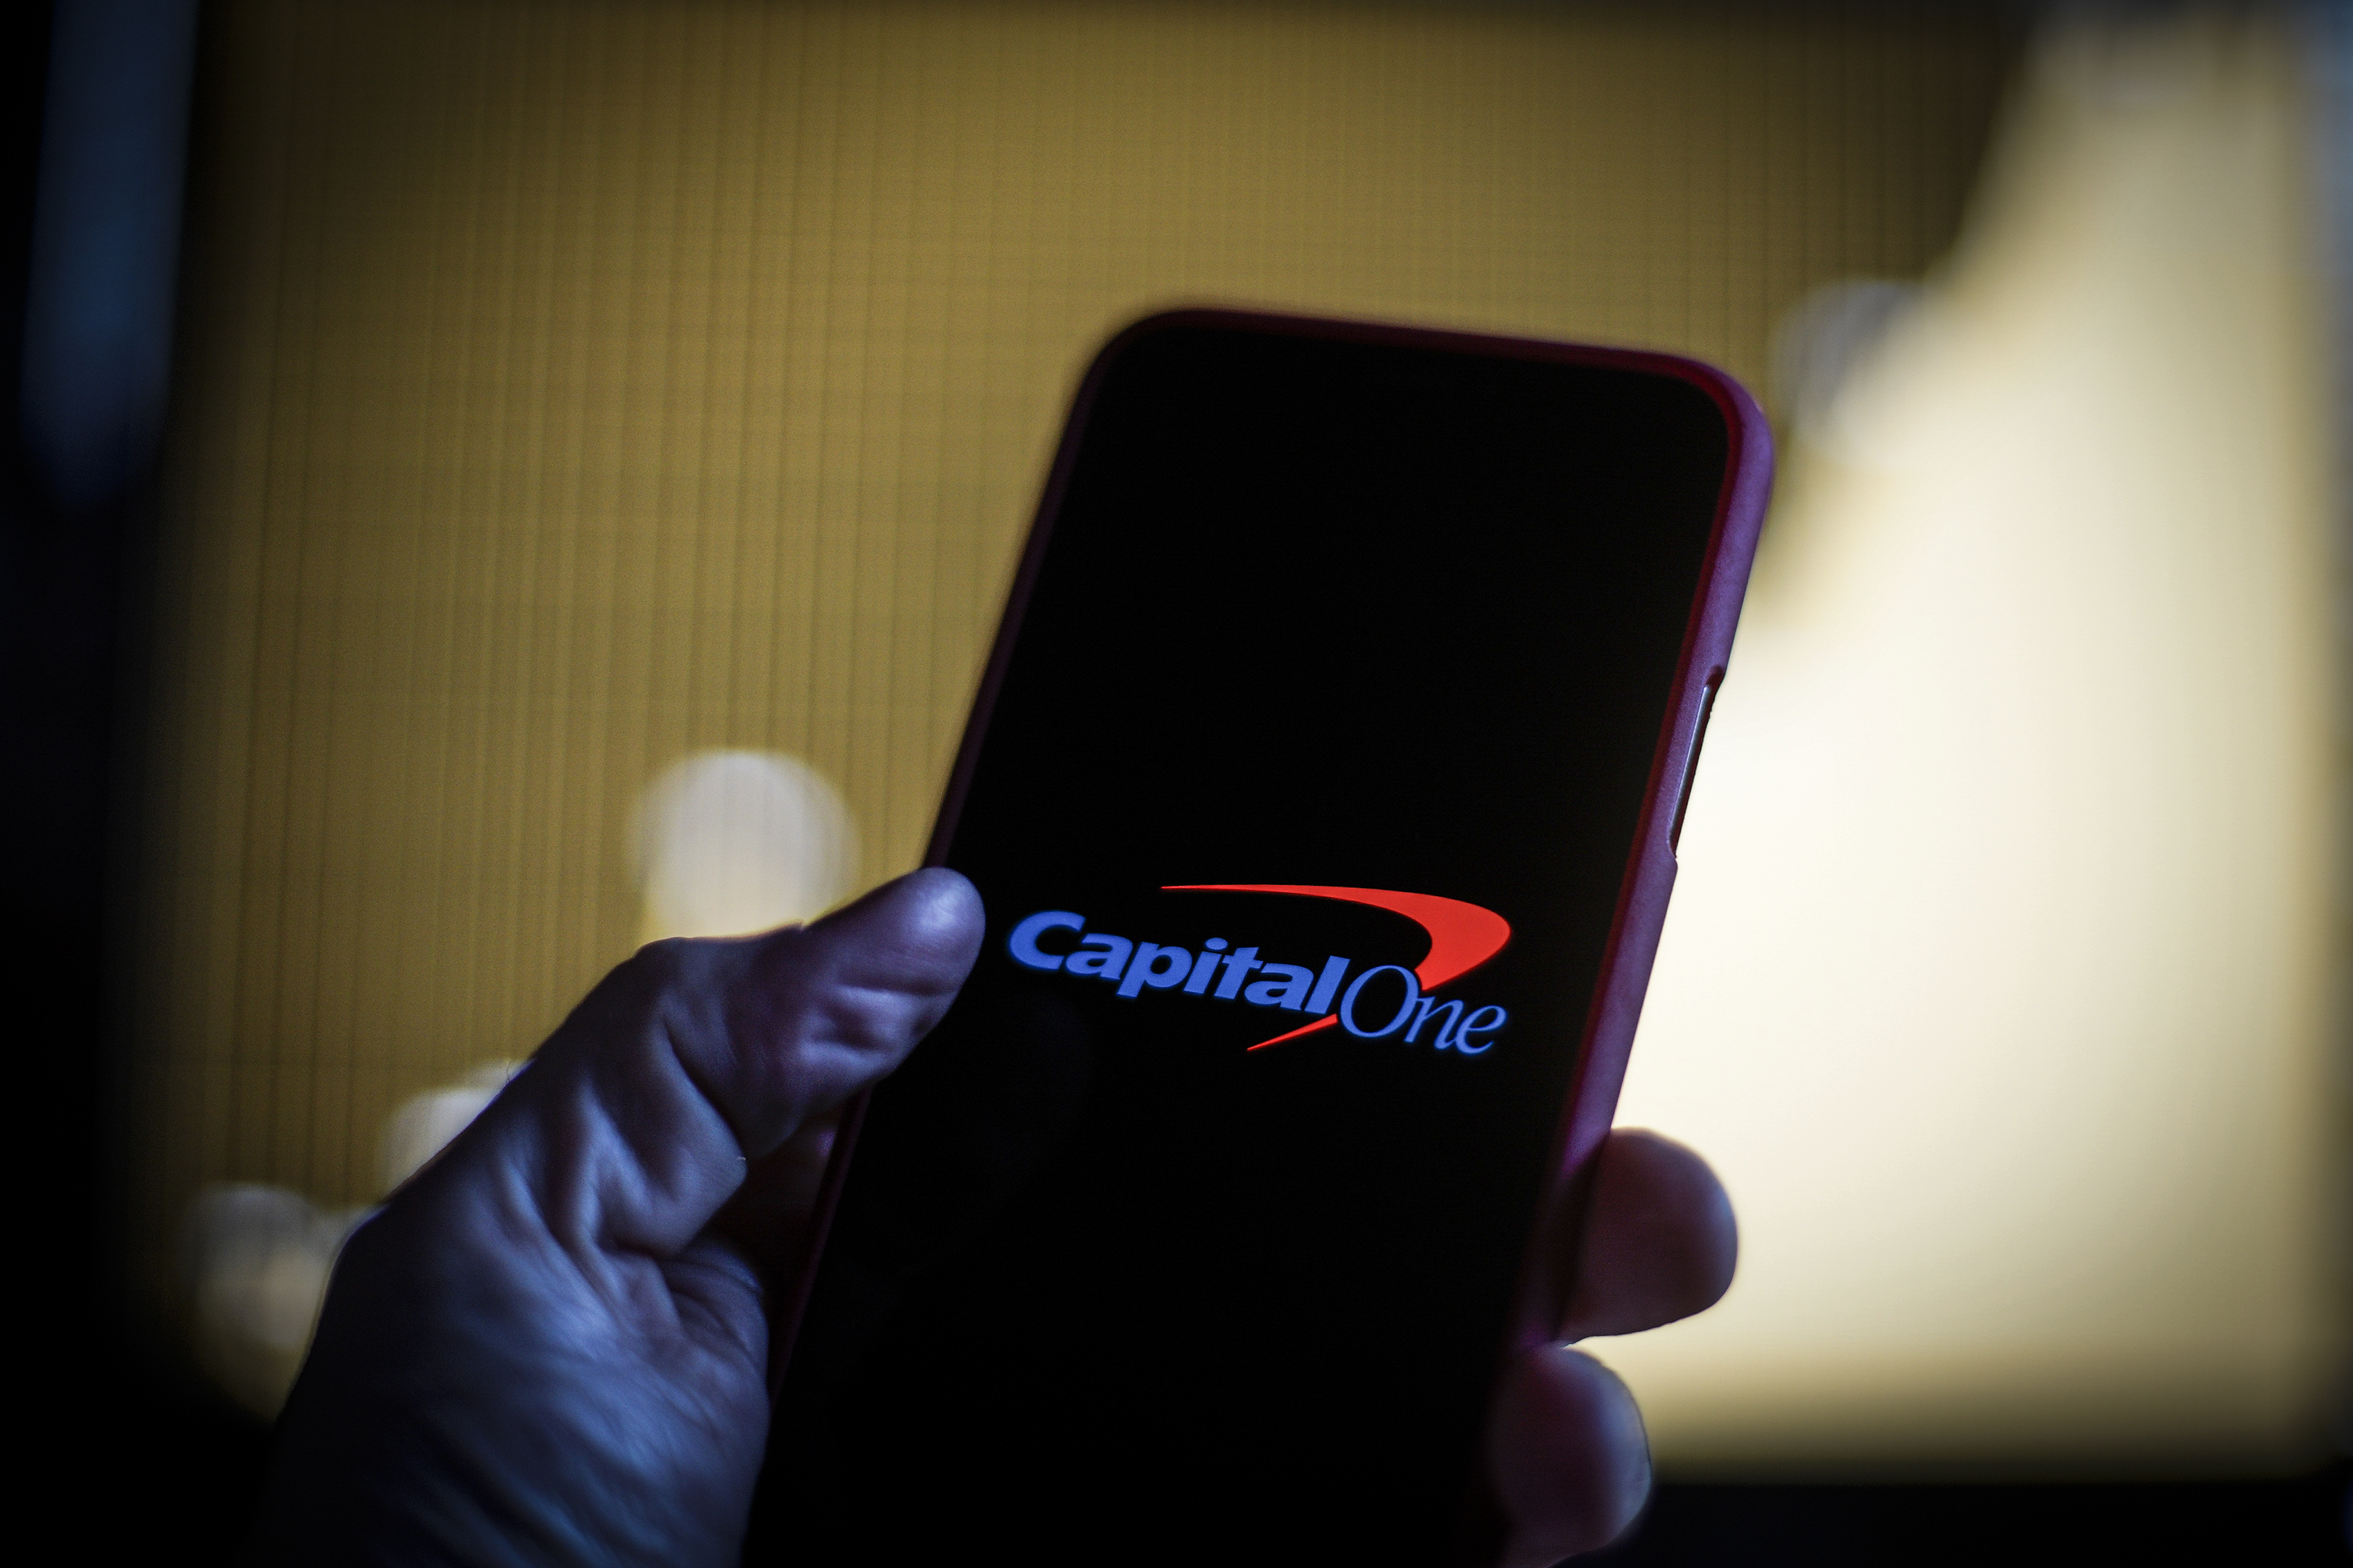 Capital One hacked, over 100 million customers affected | TechCrunch